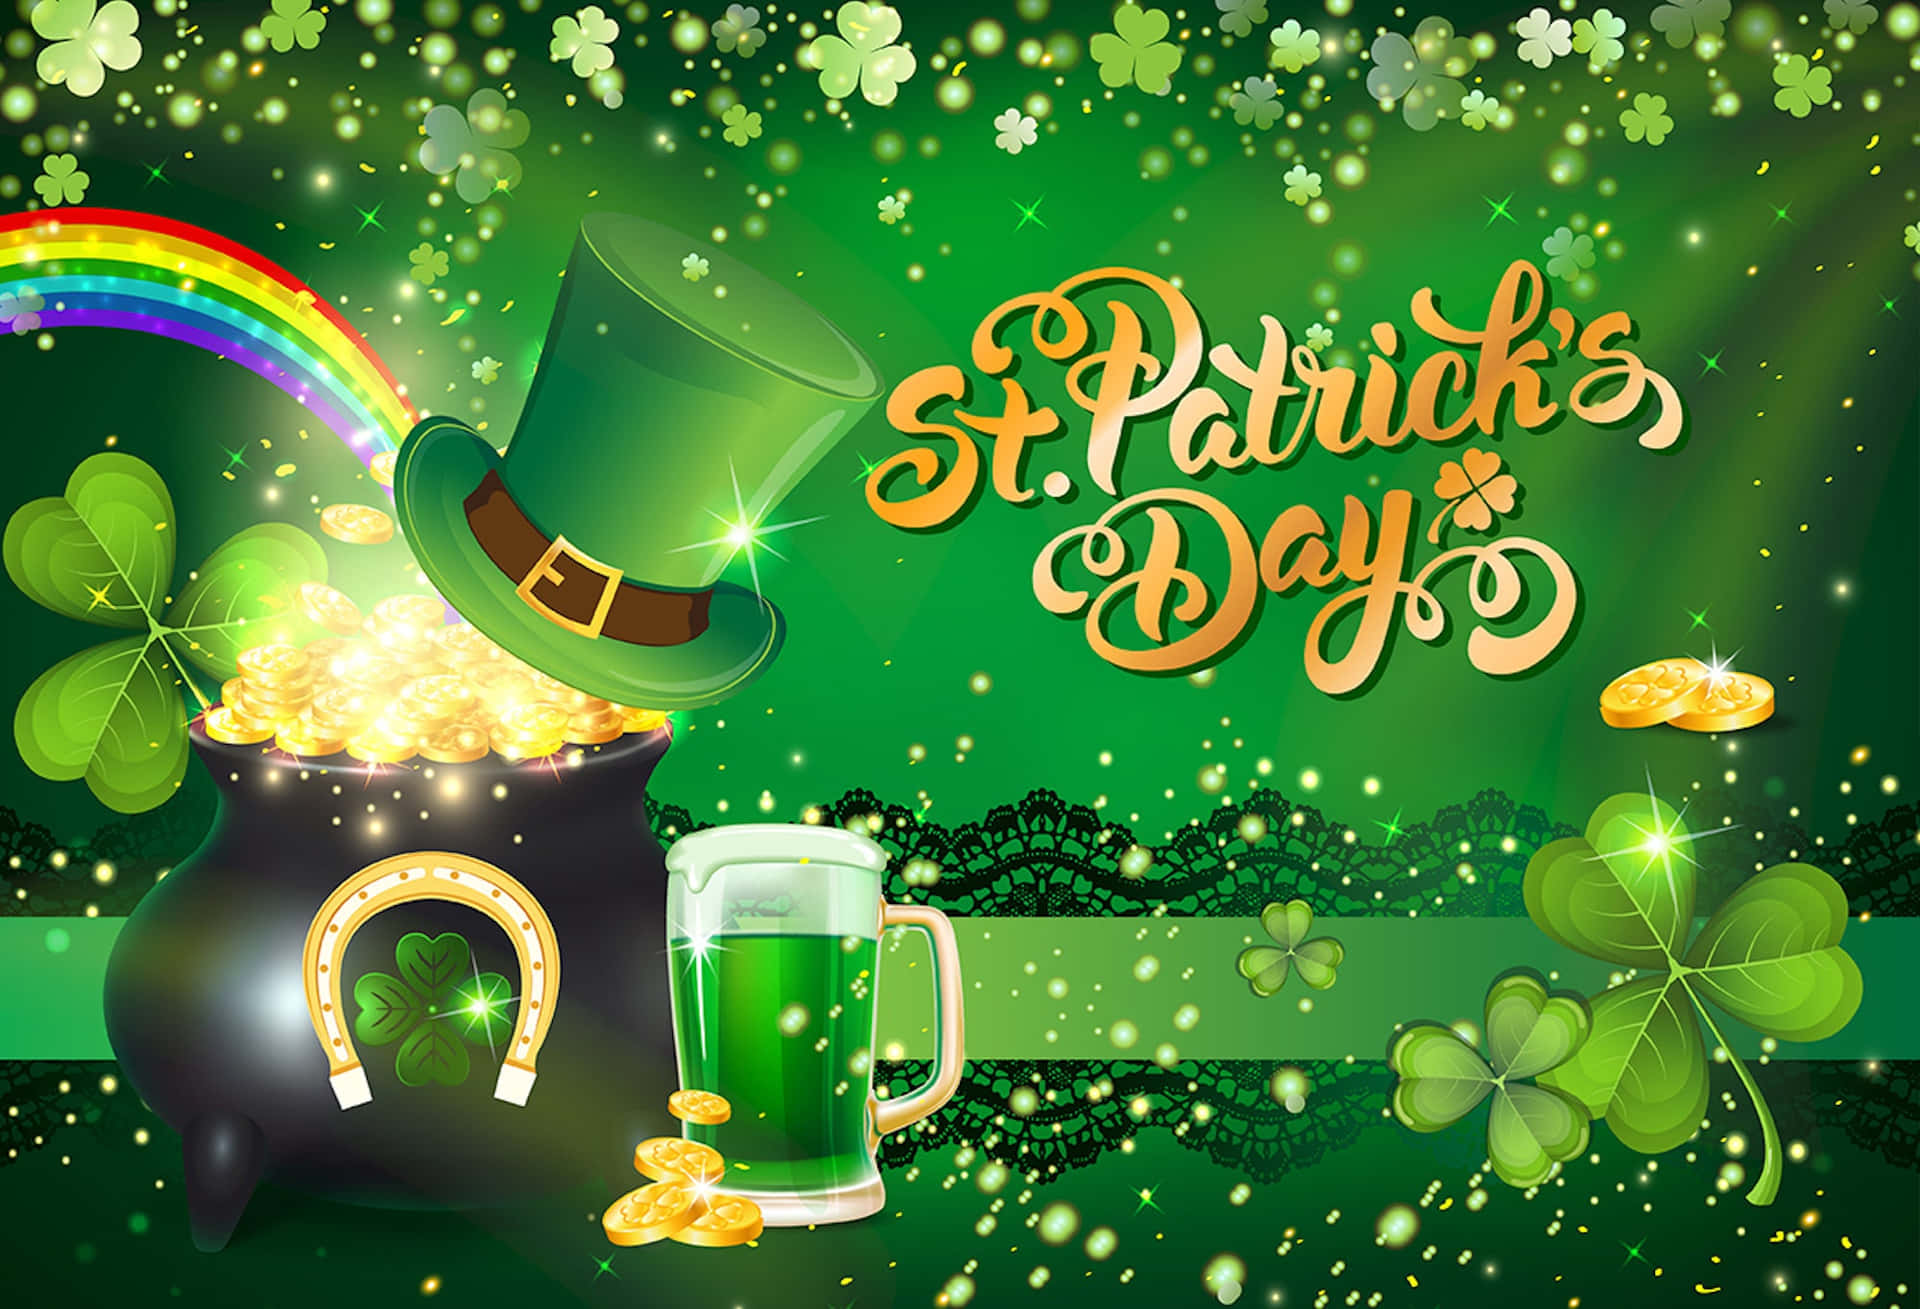 Celebrate St. Patrick's Day with Friends&Family on Zoom!